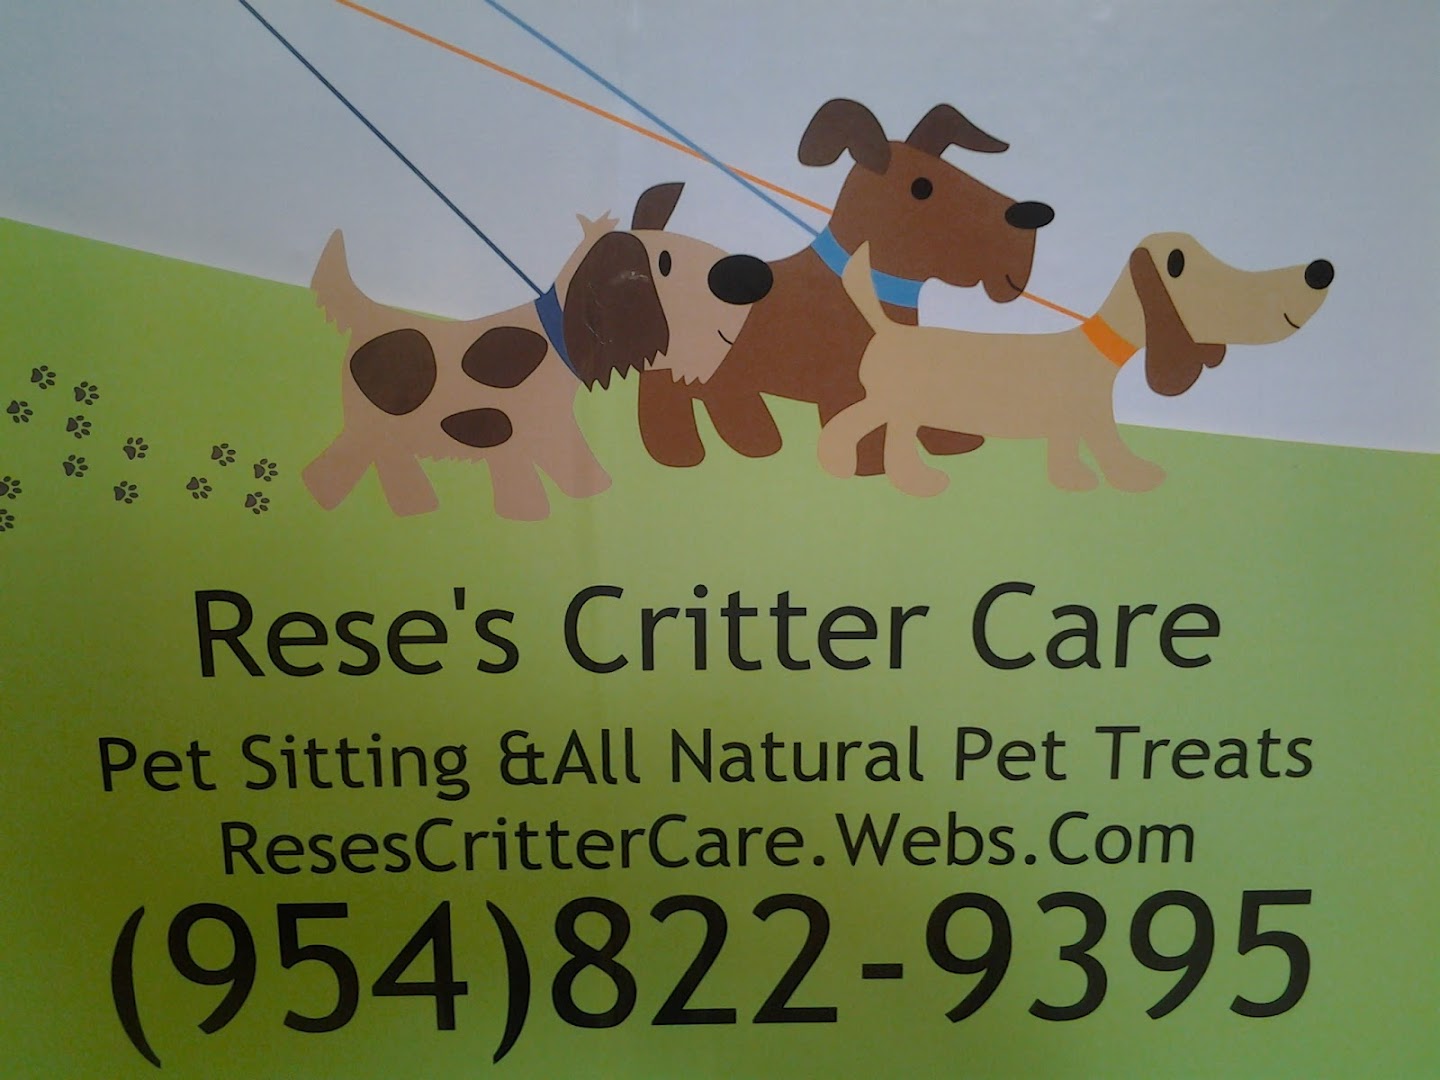 Rese's Critter Care